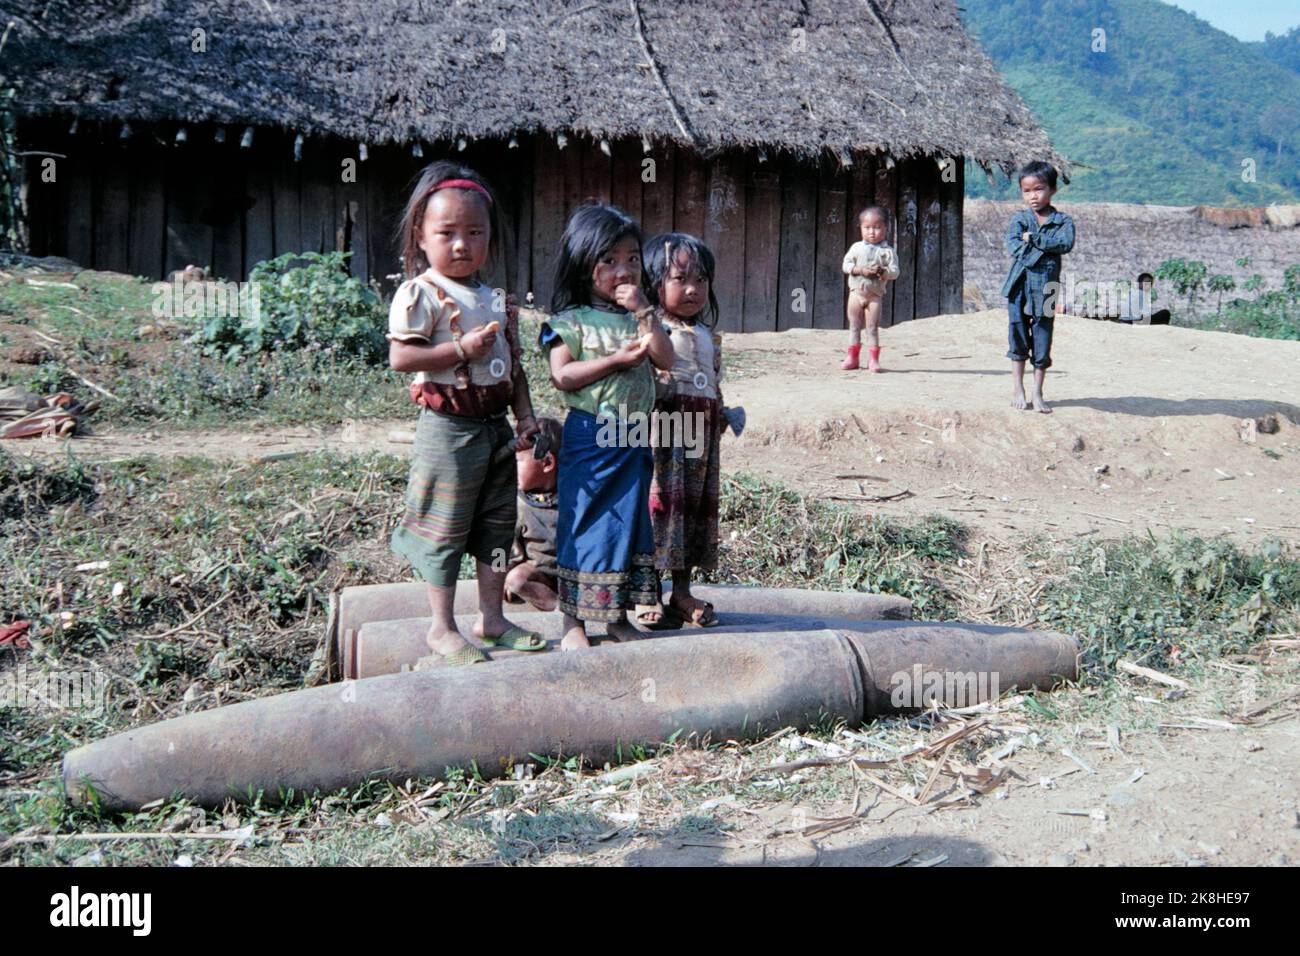 US-made cluster bomb casings collected and placed at roadside scrap yard, Plain of Jars, Laos 1997 Stock Photo